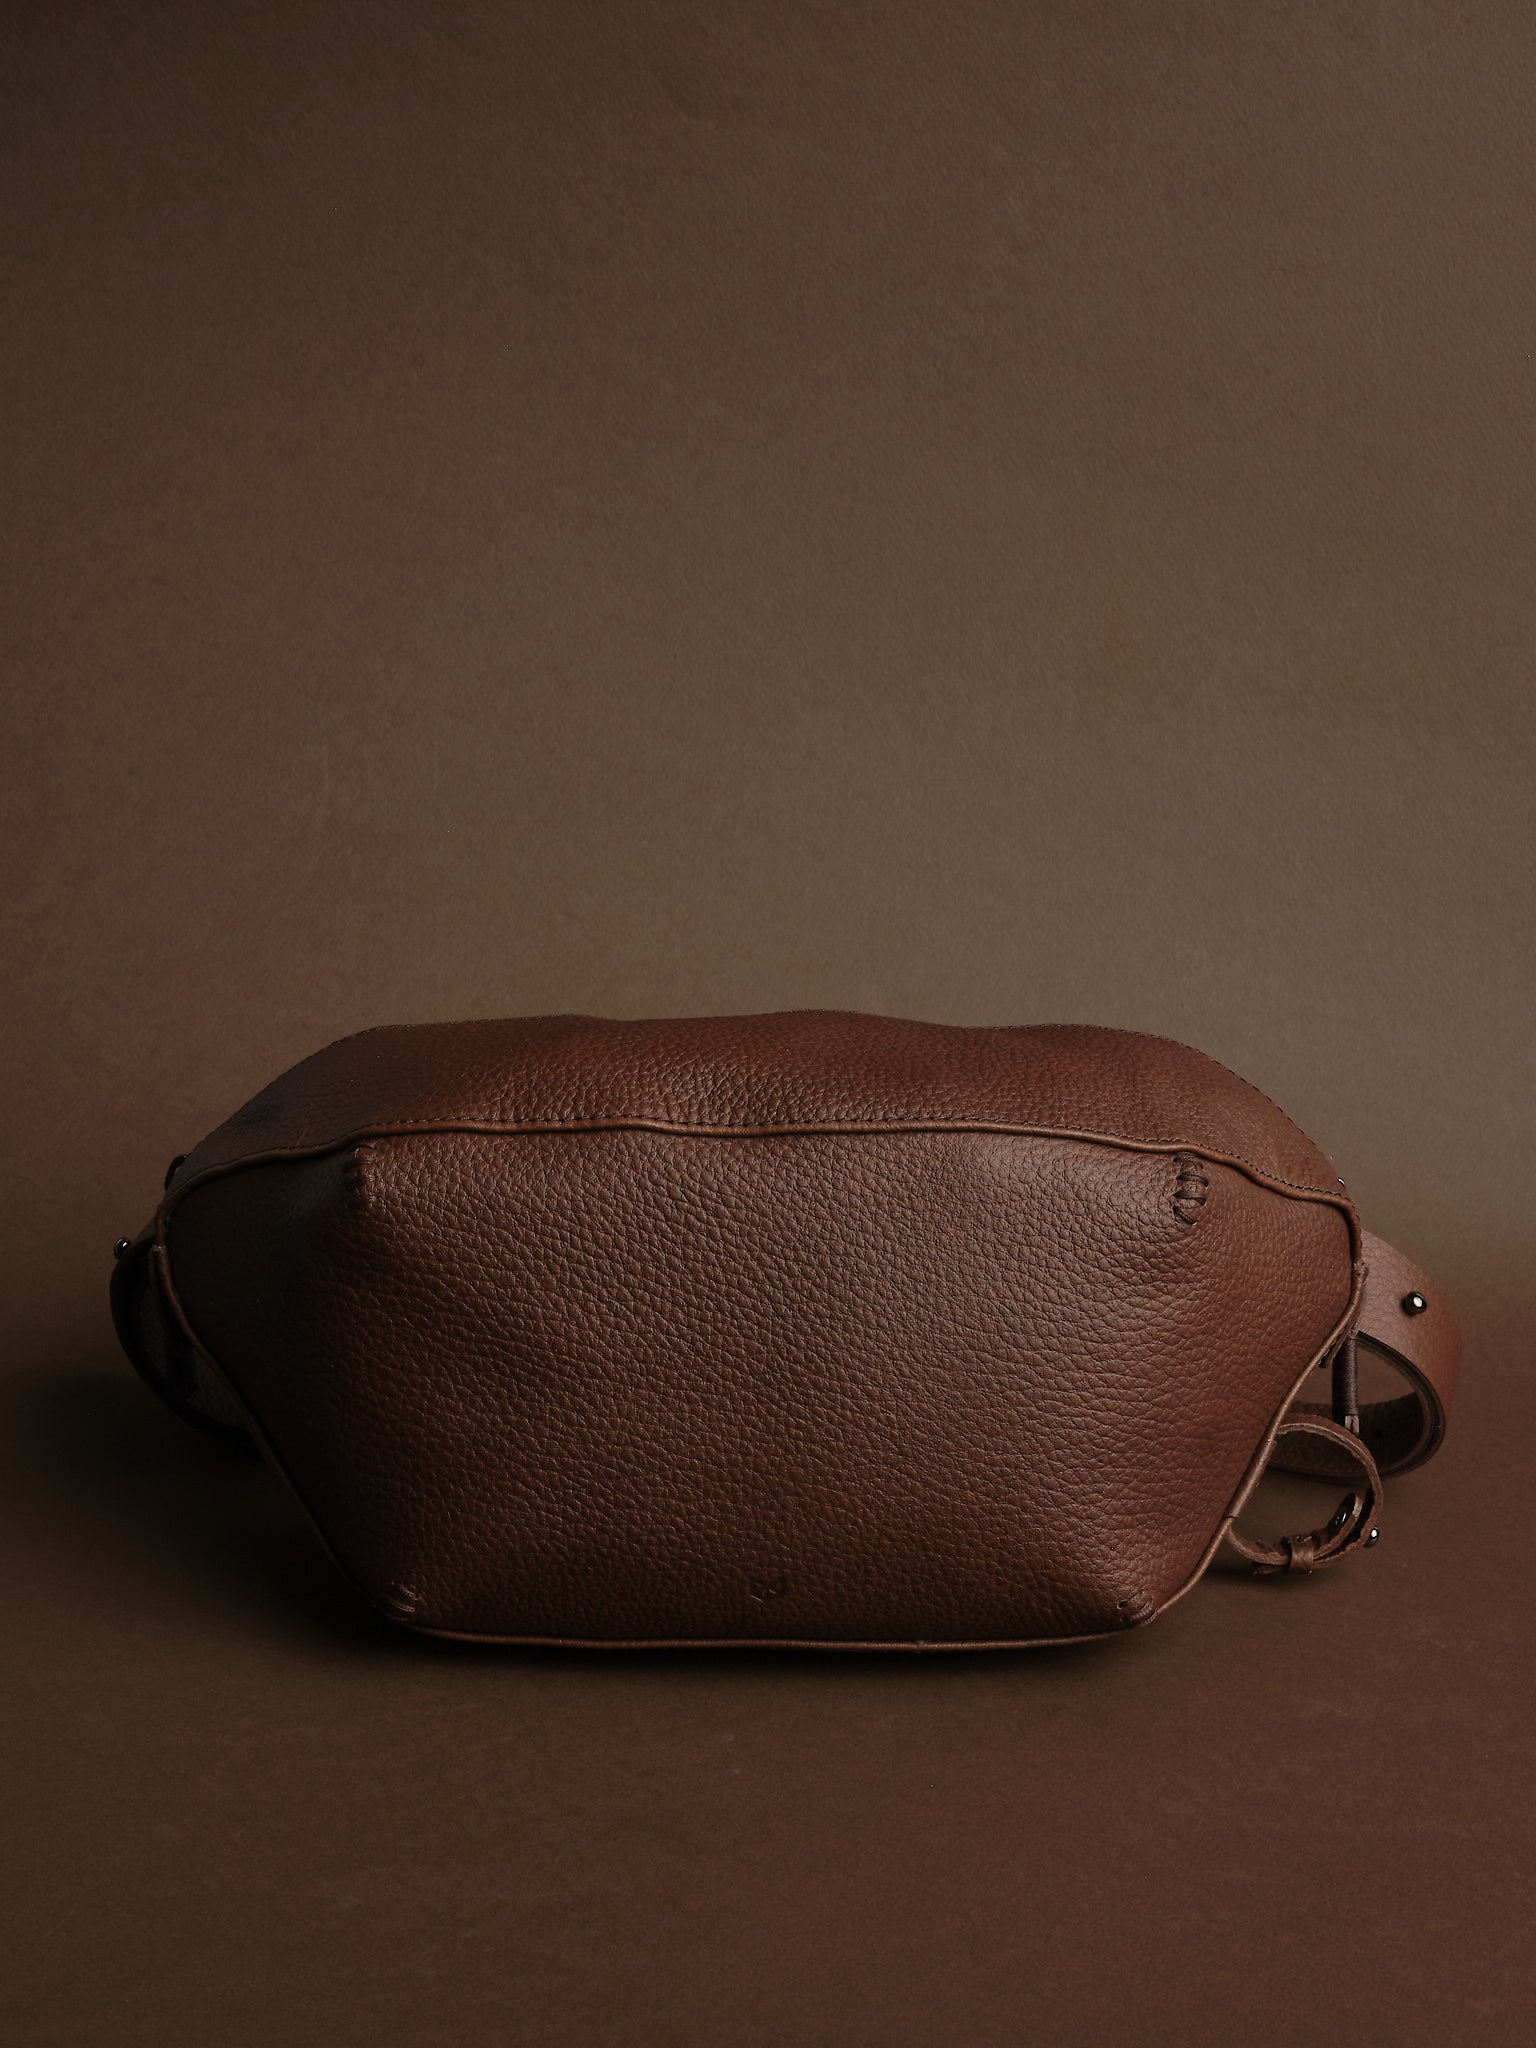 Leather Sling Bag. Fanny Pack Brown by Capra